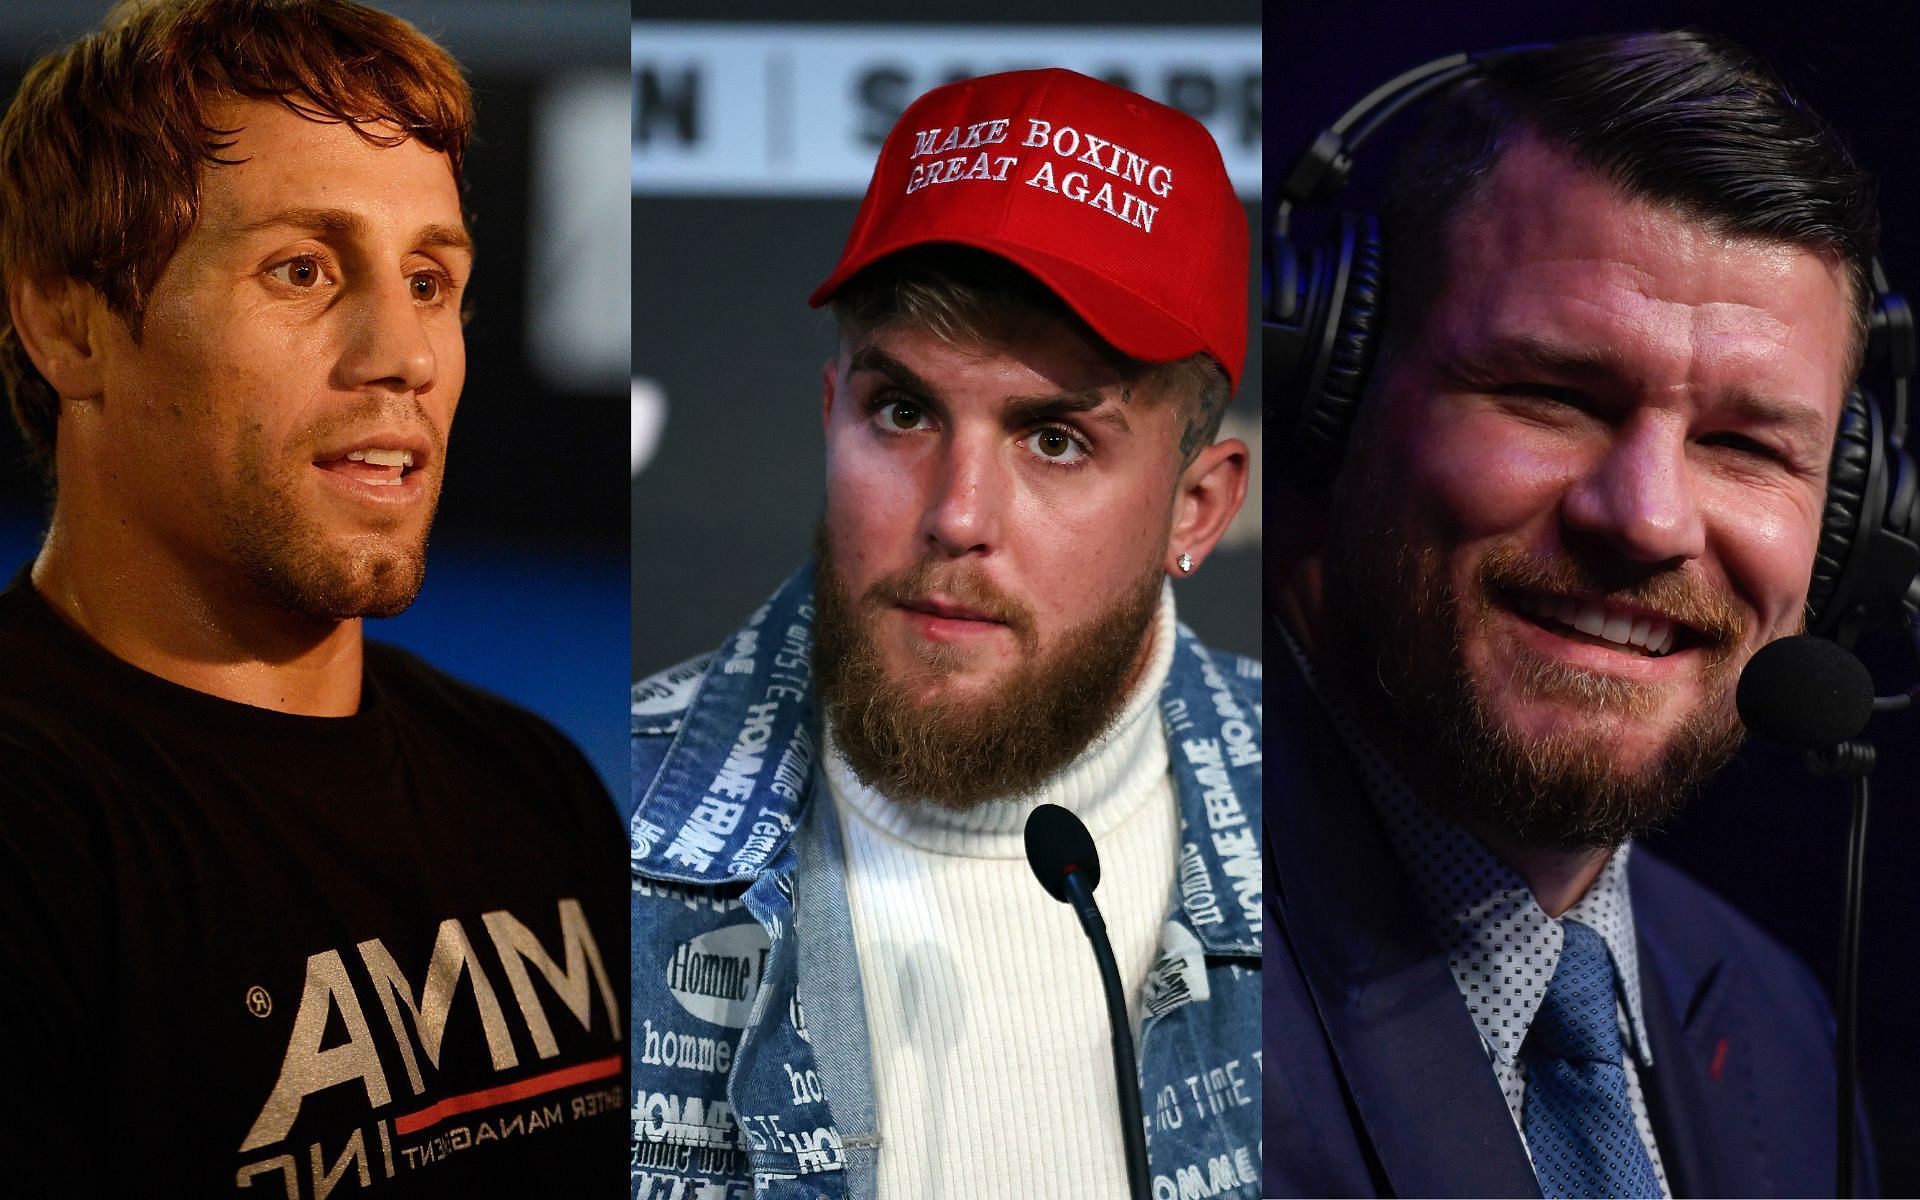 Urijah Faber (left), Jake Paul (center), and Michael Bisping (right)